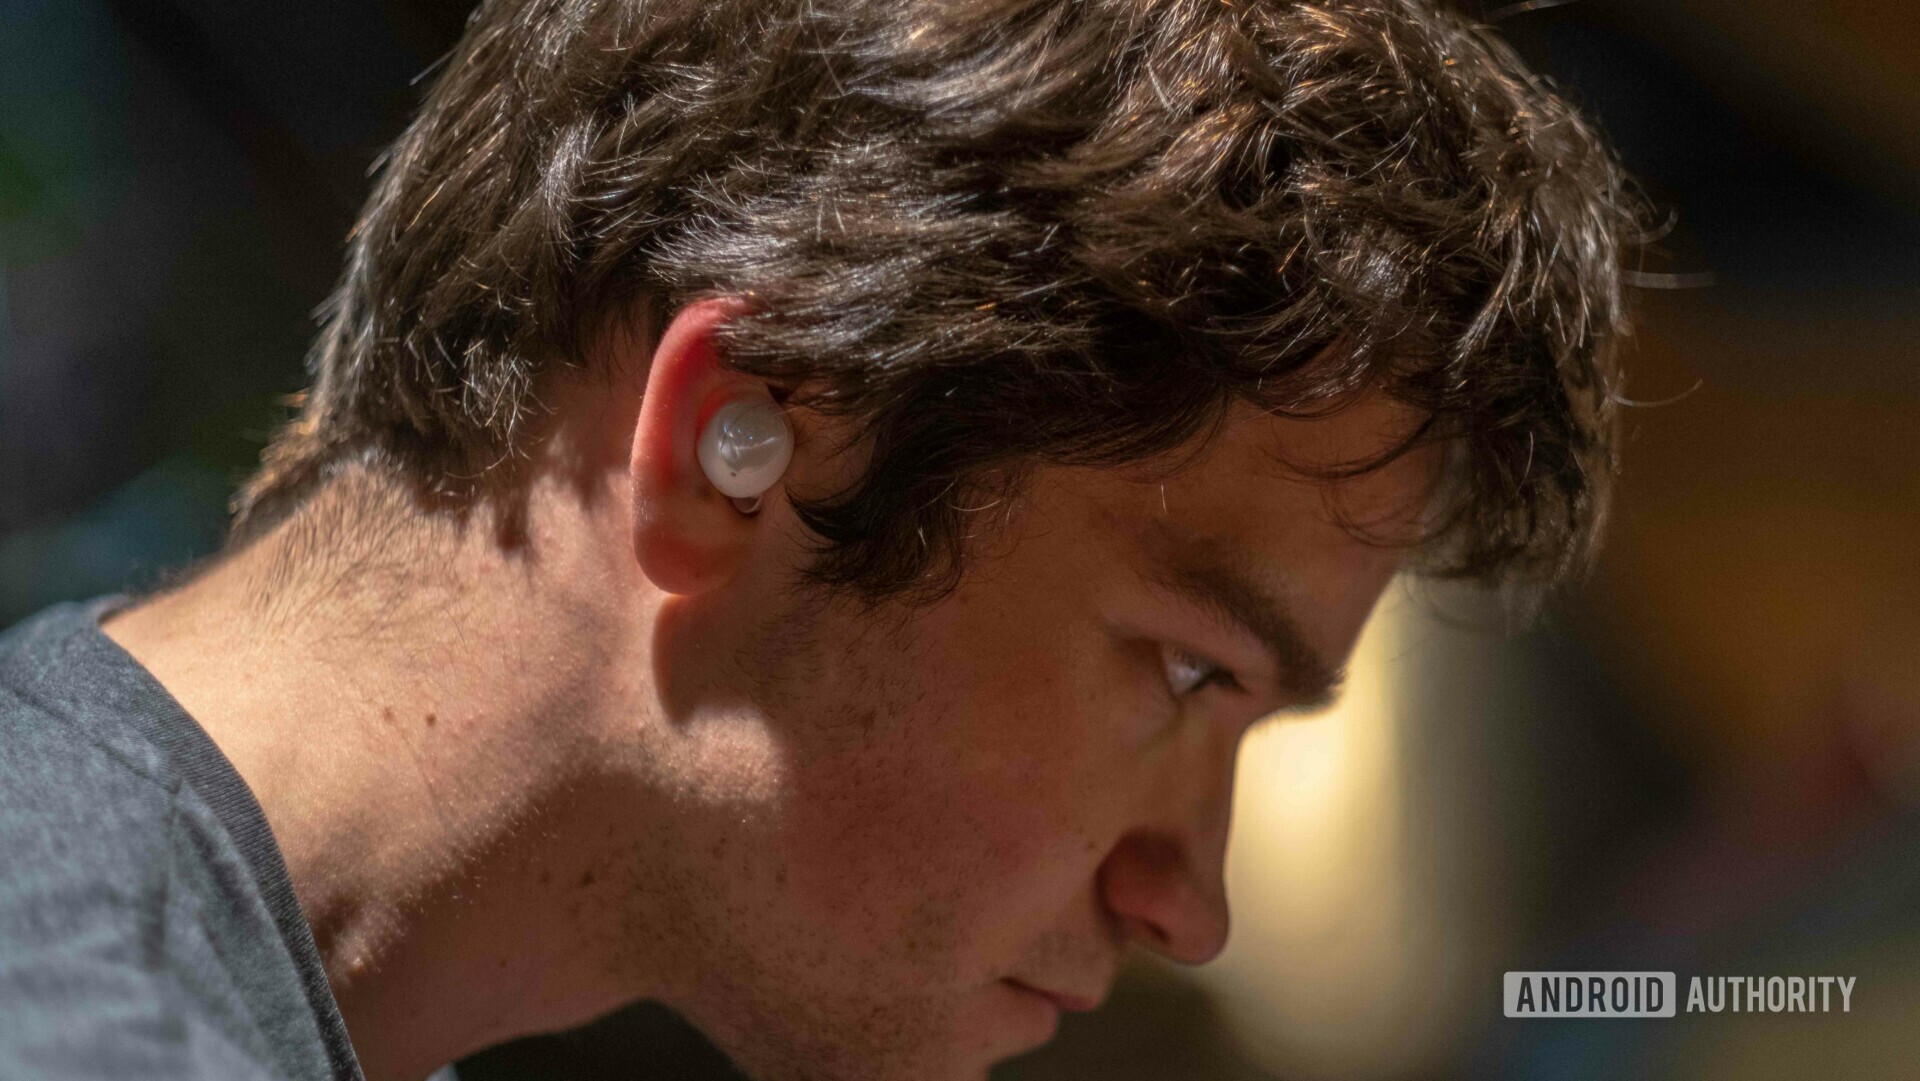 View of the Samsung Galaxy Buds worn in ear by a man.